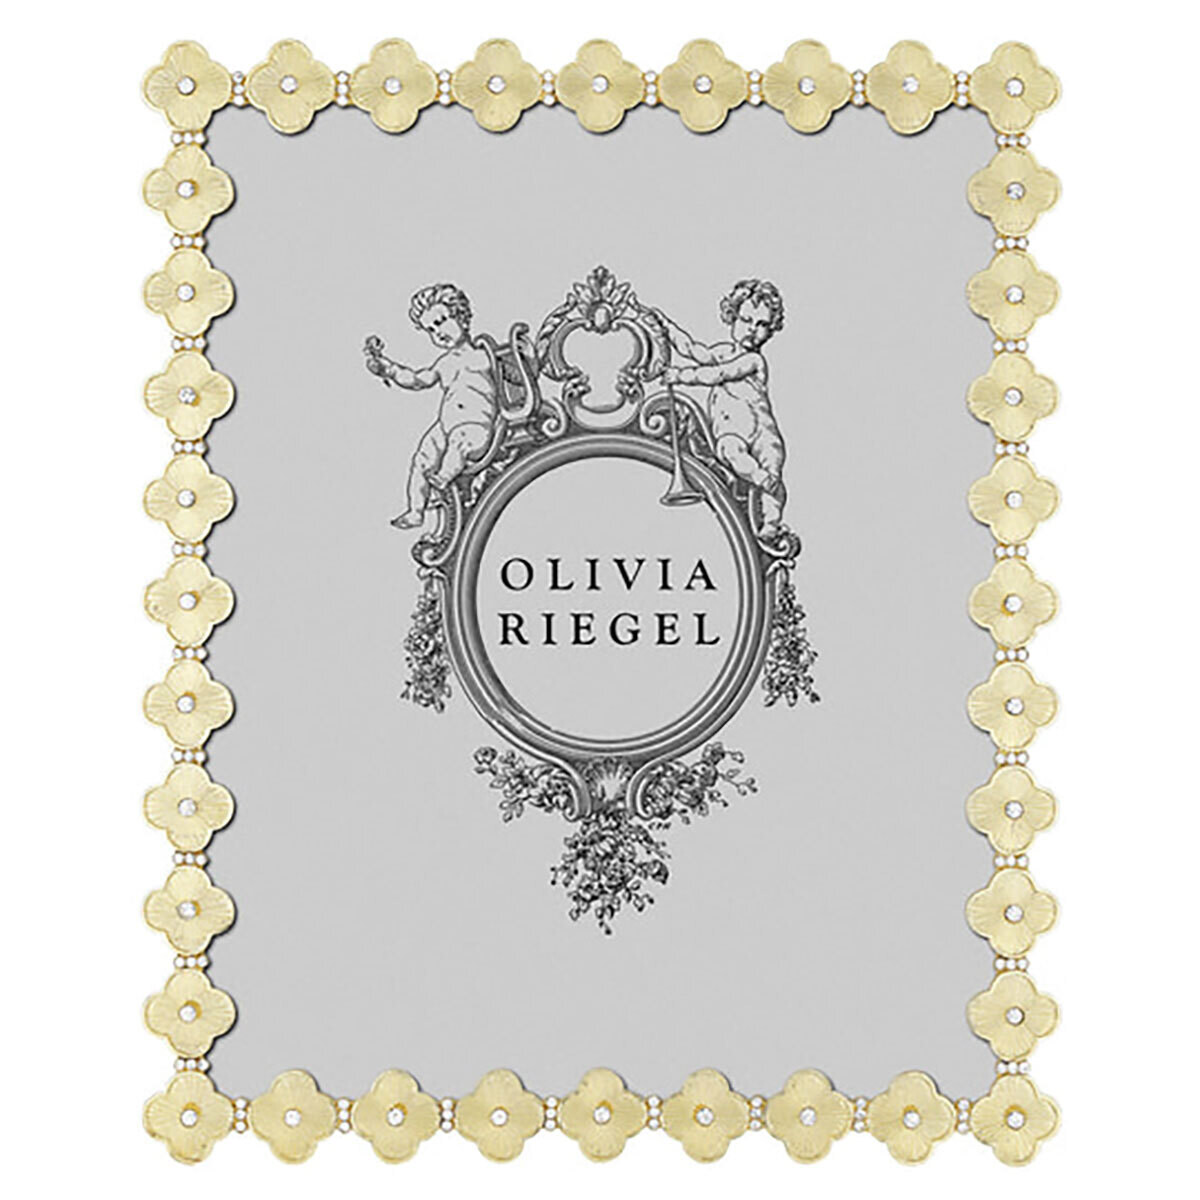 Olivia Riegel Gold Clover 8" x 10" Picture Frame RT2254